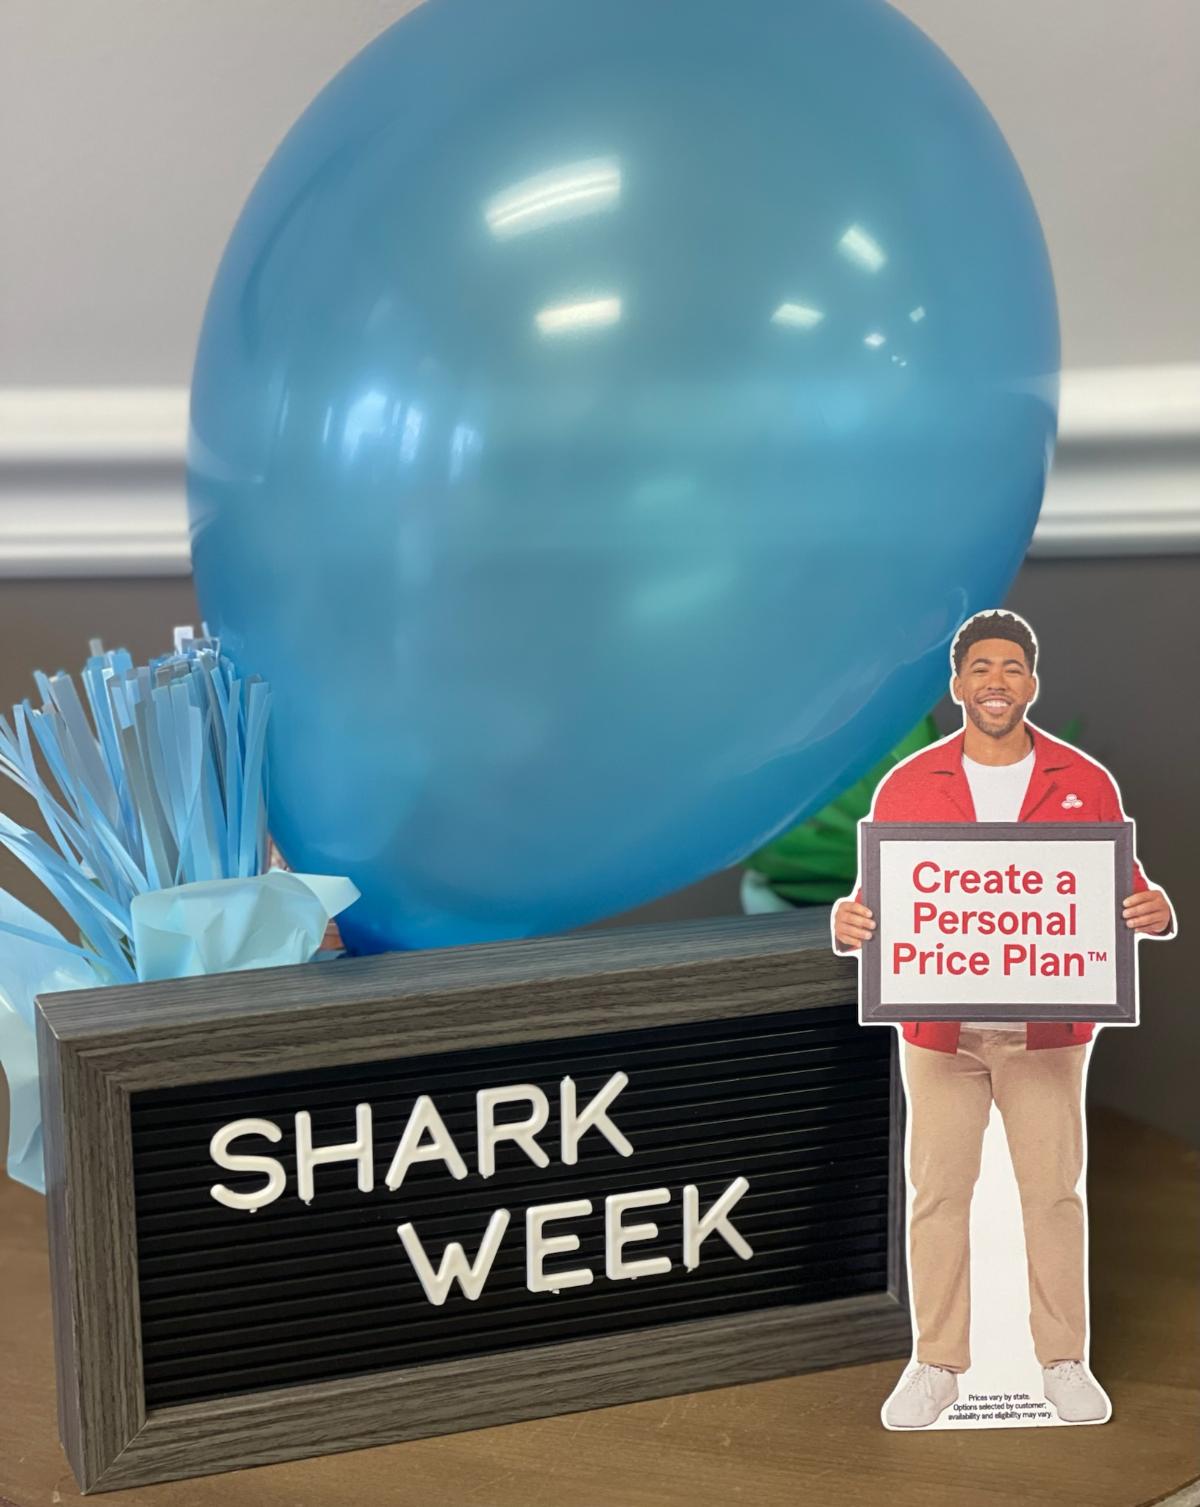 Call our office and let us see if we can help take a bite out of that new renewal premium! 😉 🦈 
904.551.1643